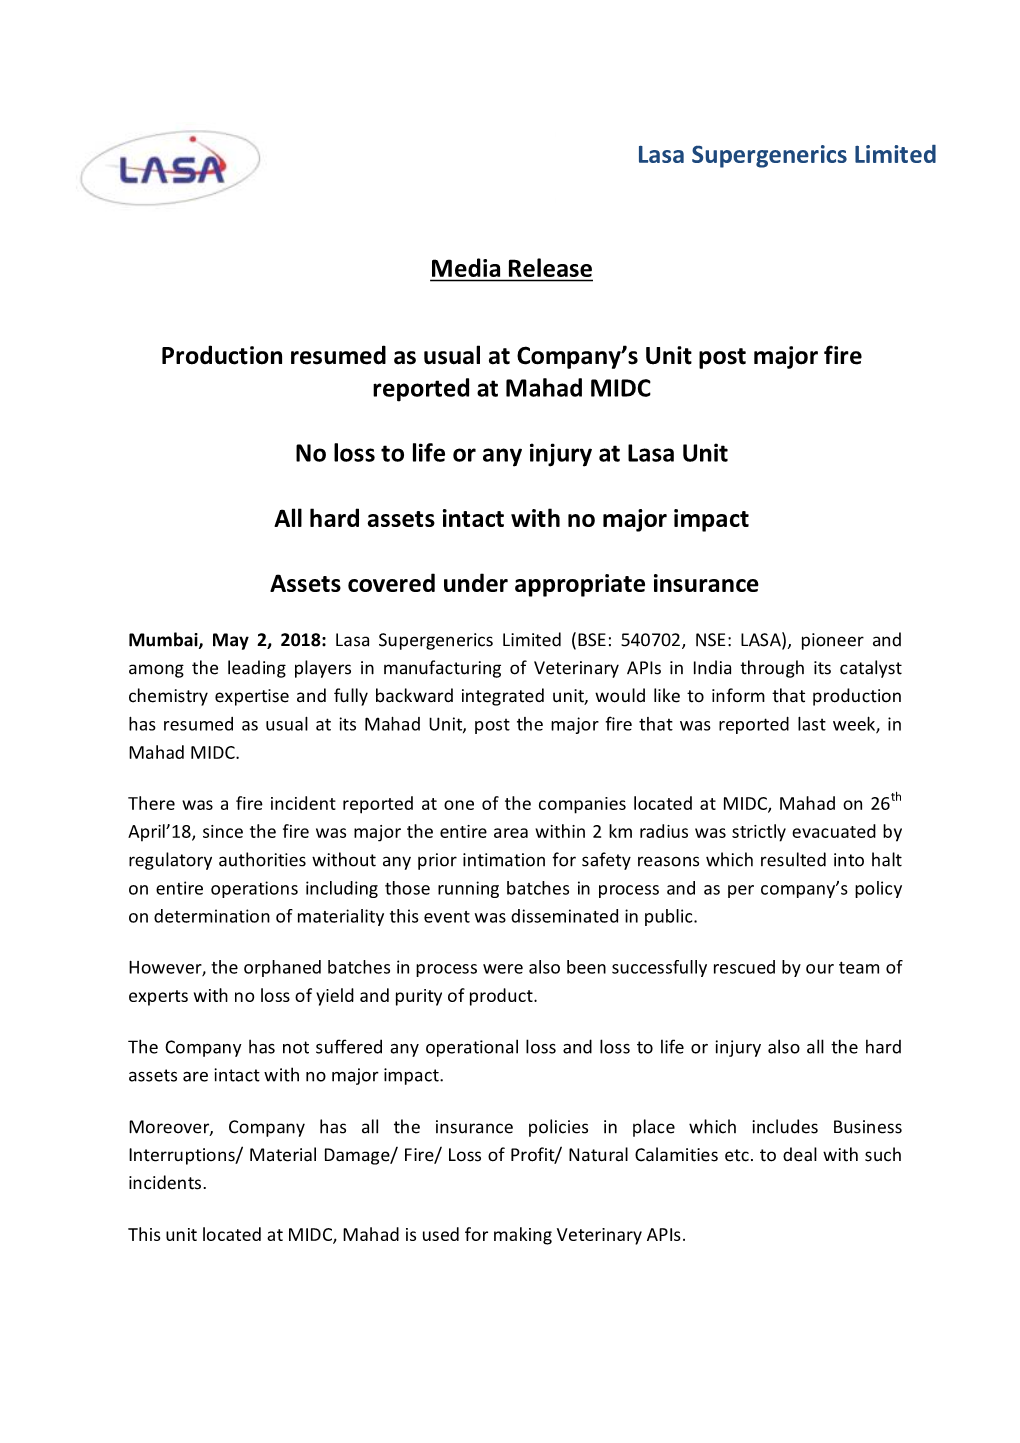 Lasa Supergenerics Limited Media Release Production Resumed As Usual at Company's Unit Post Major Fire Reported at Mahad MIDC